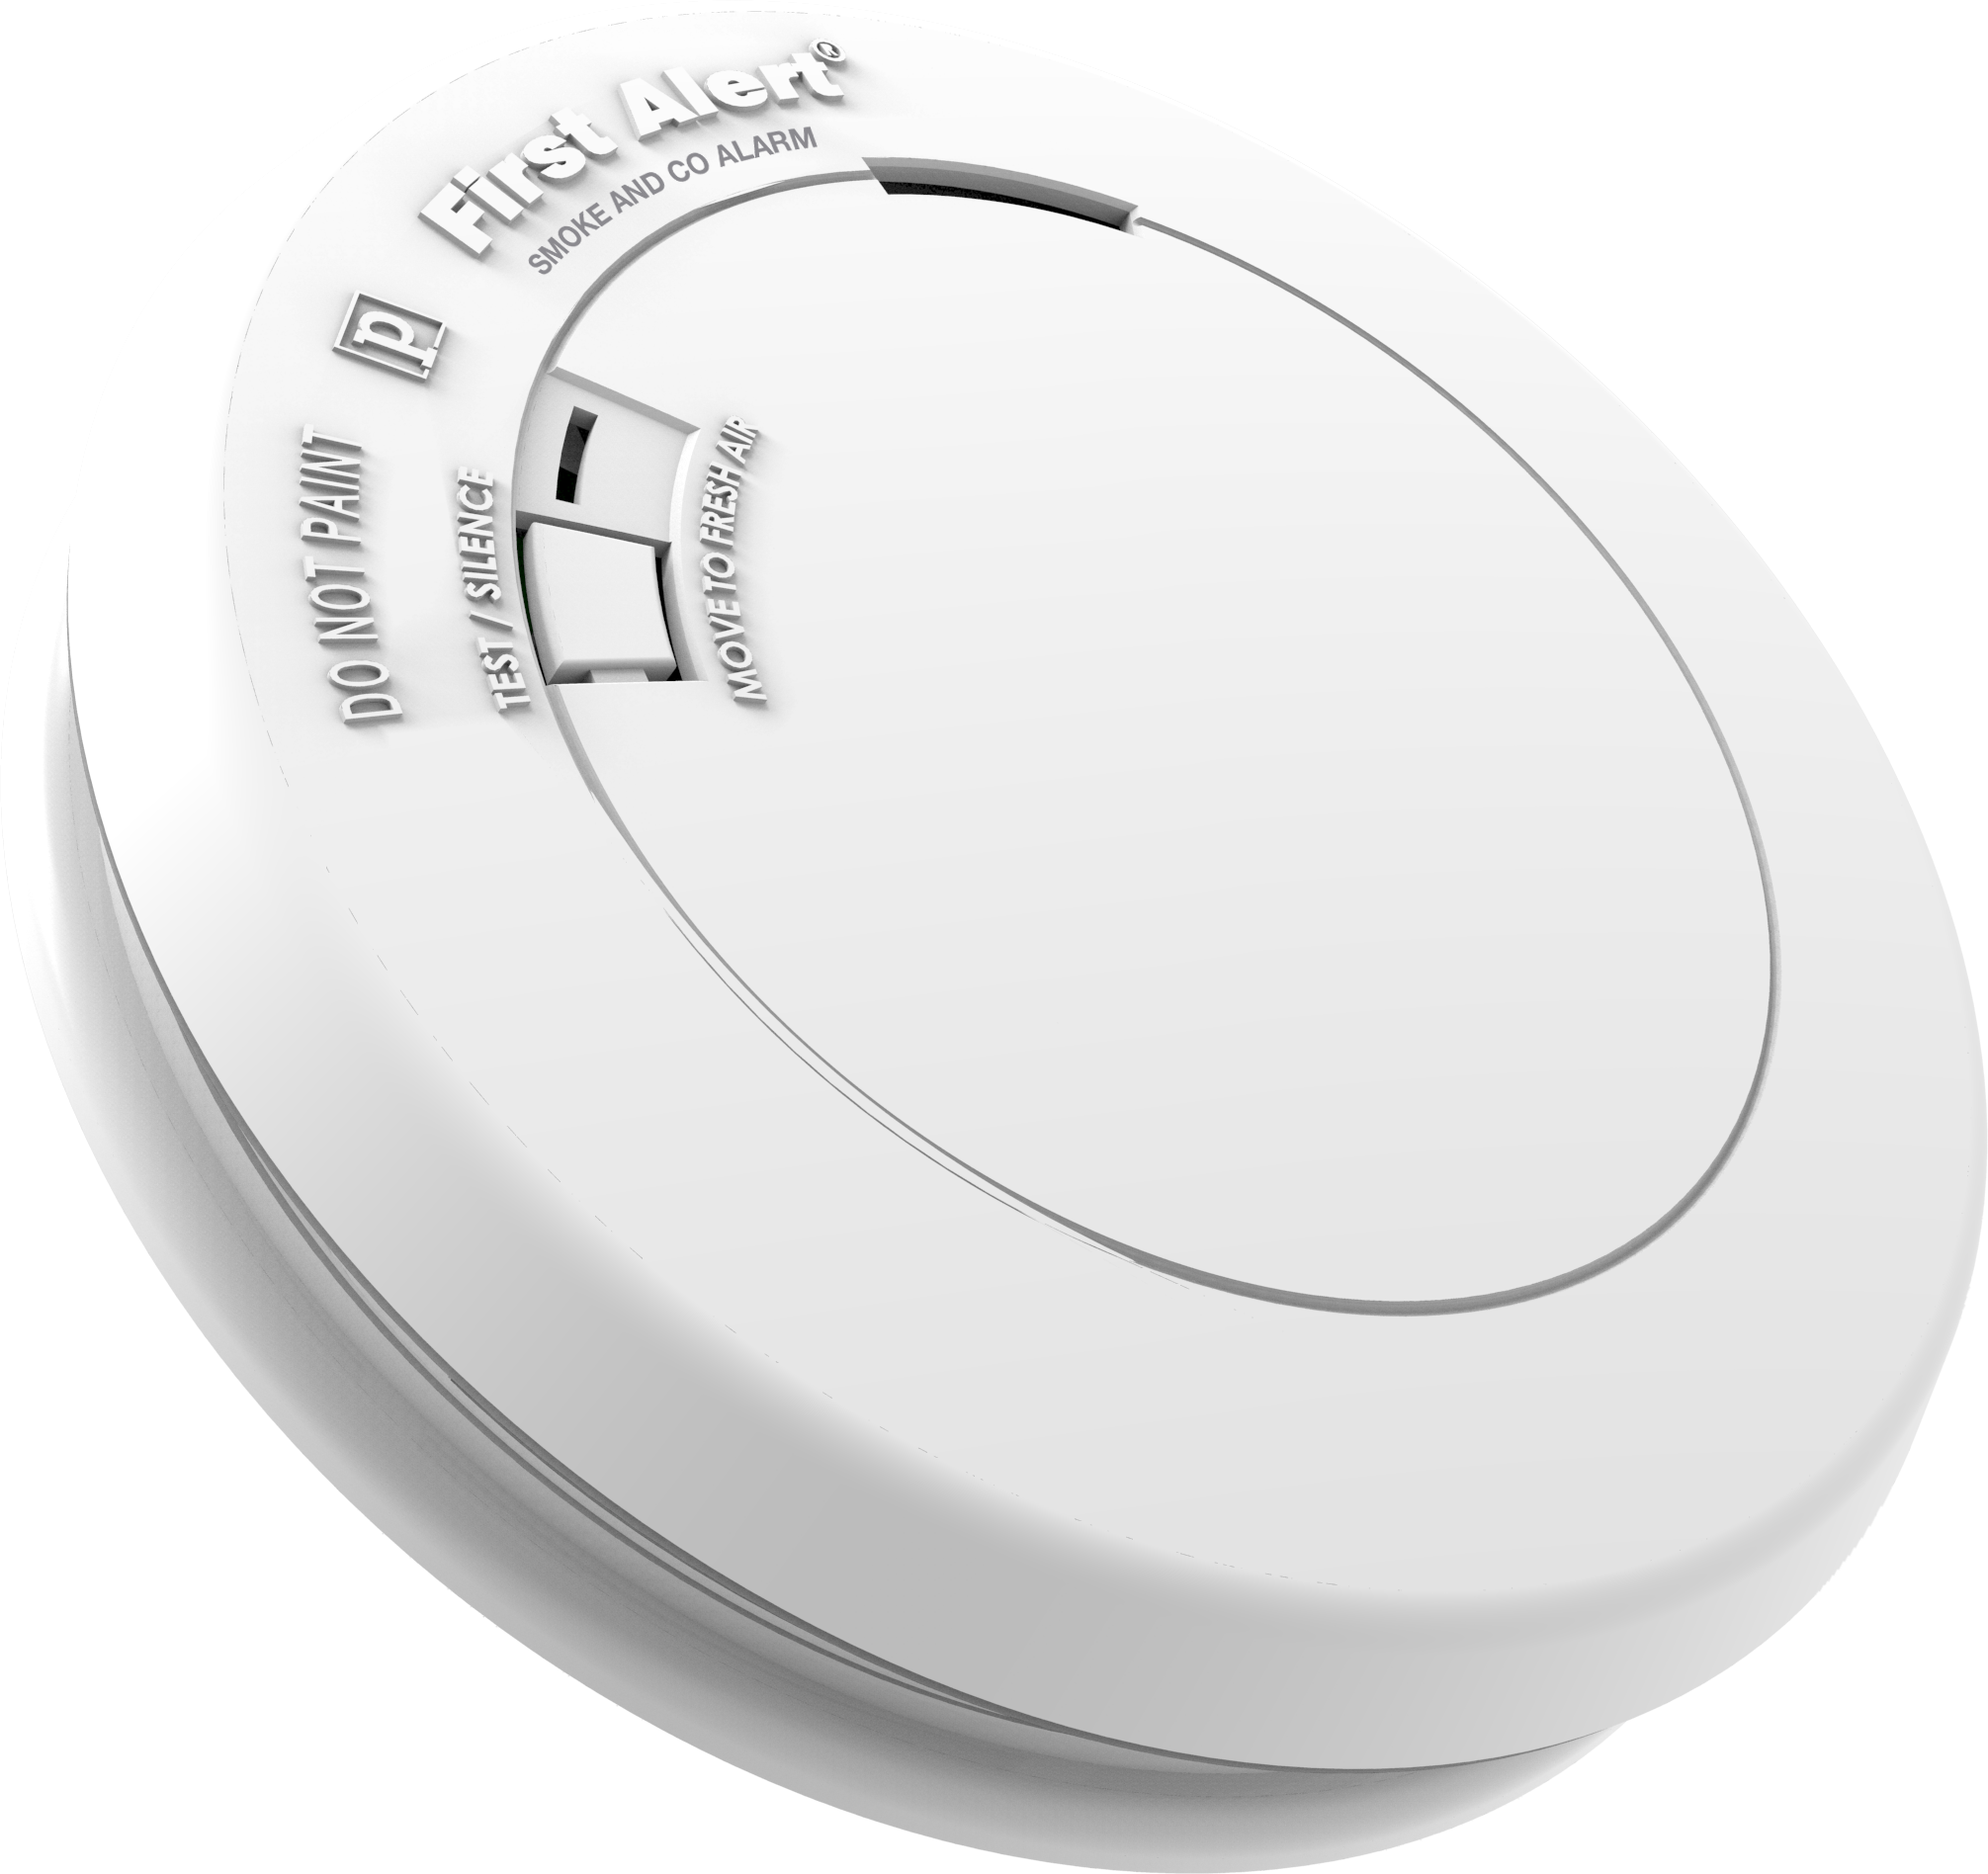 Low profile design. 10 year tamperproof sealed lithium power cell photoelectric smoke and CO combo alarm with silence feature. Tamper resistant - Locks alarm to mounting bracket to prevent removal of alarm.